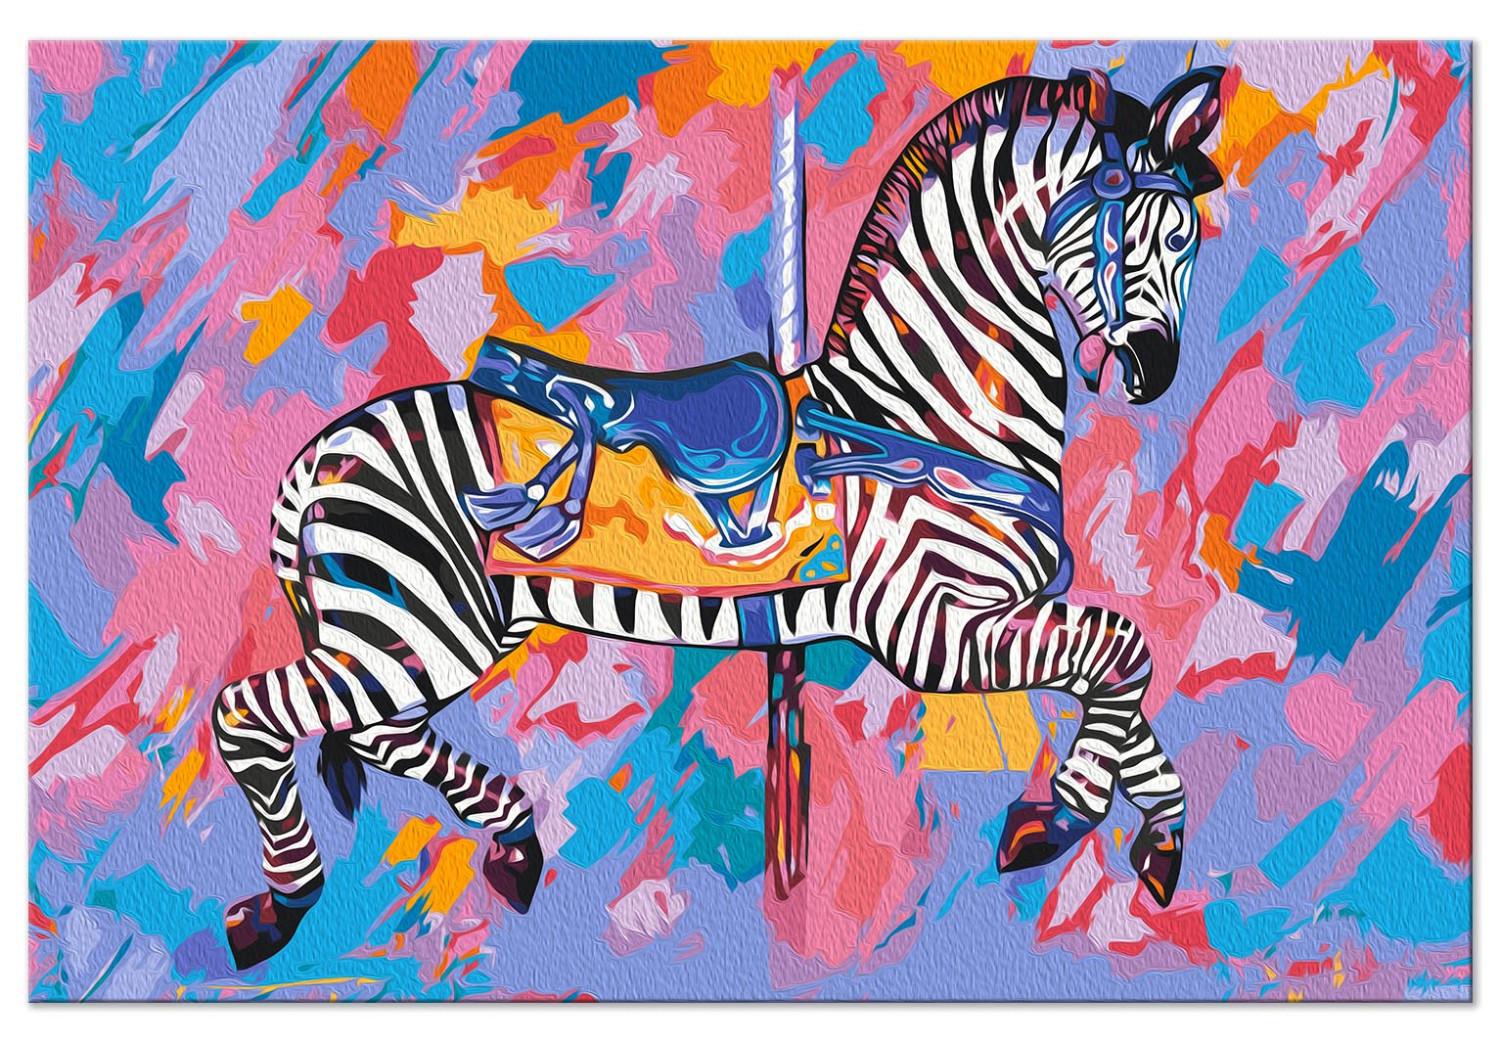 Paint by Number Kit Rainbow Zebra - Striped Animal on a Colorful Artistic Background